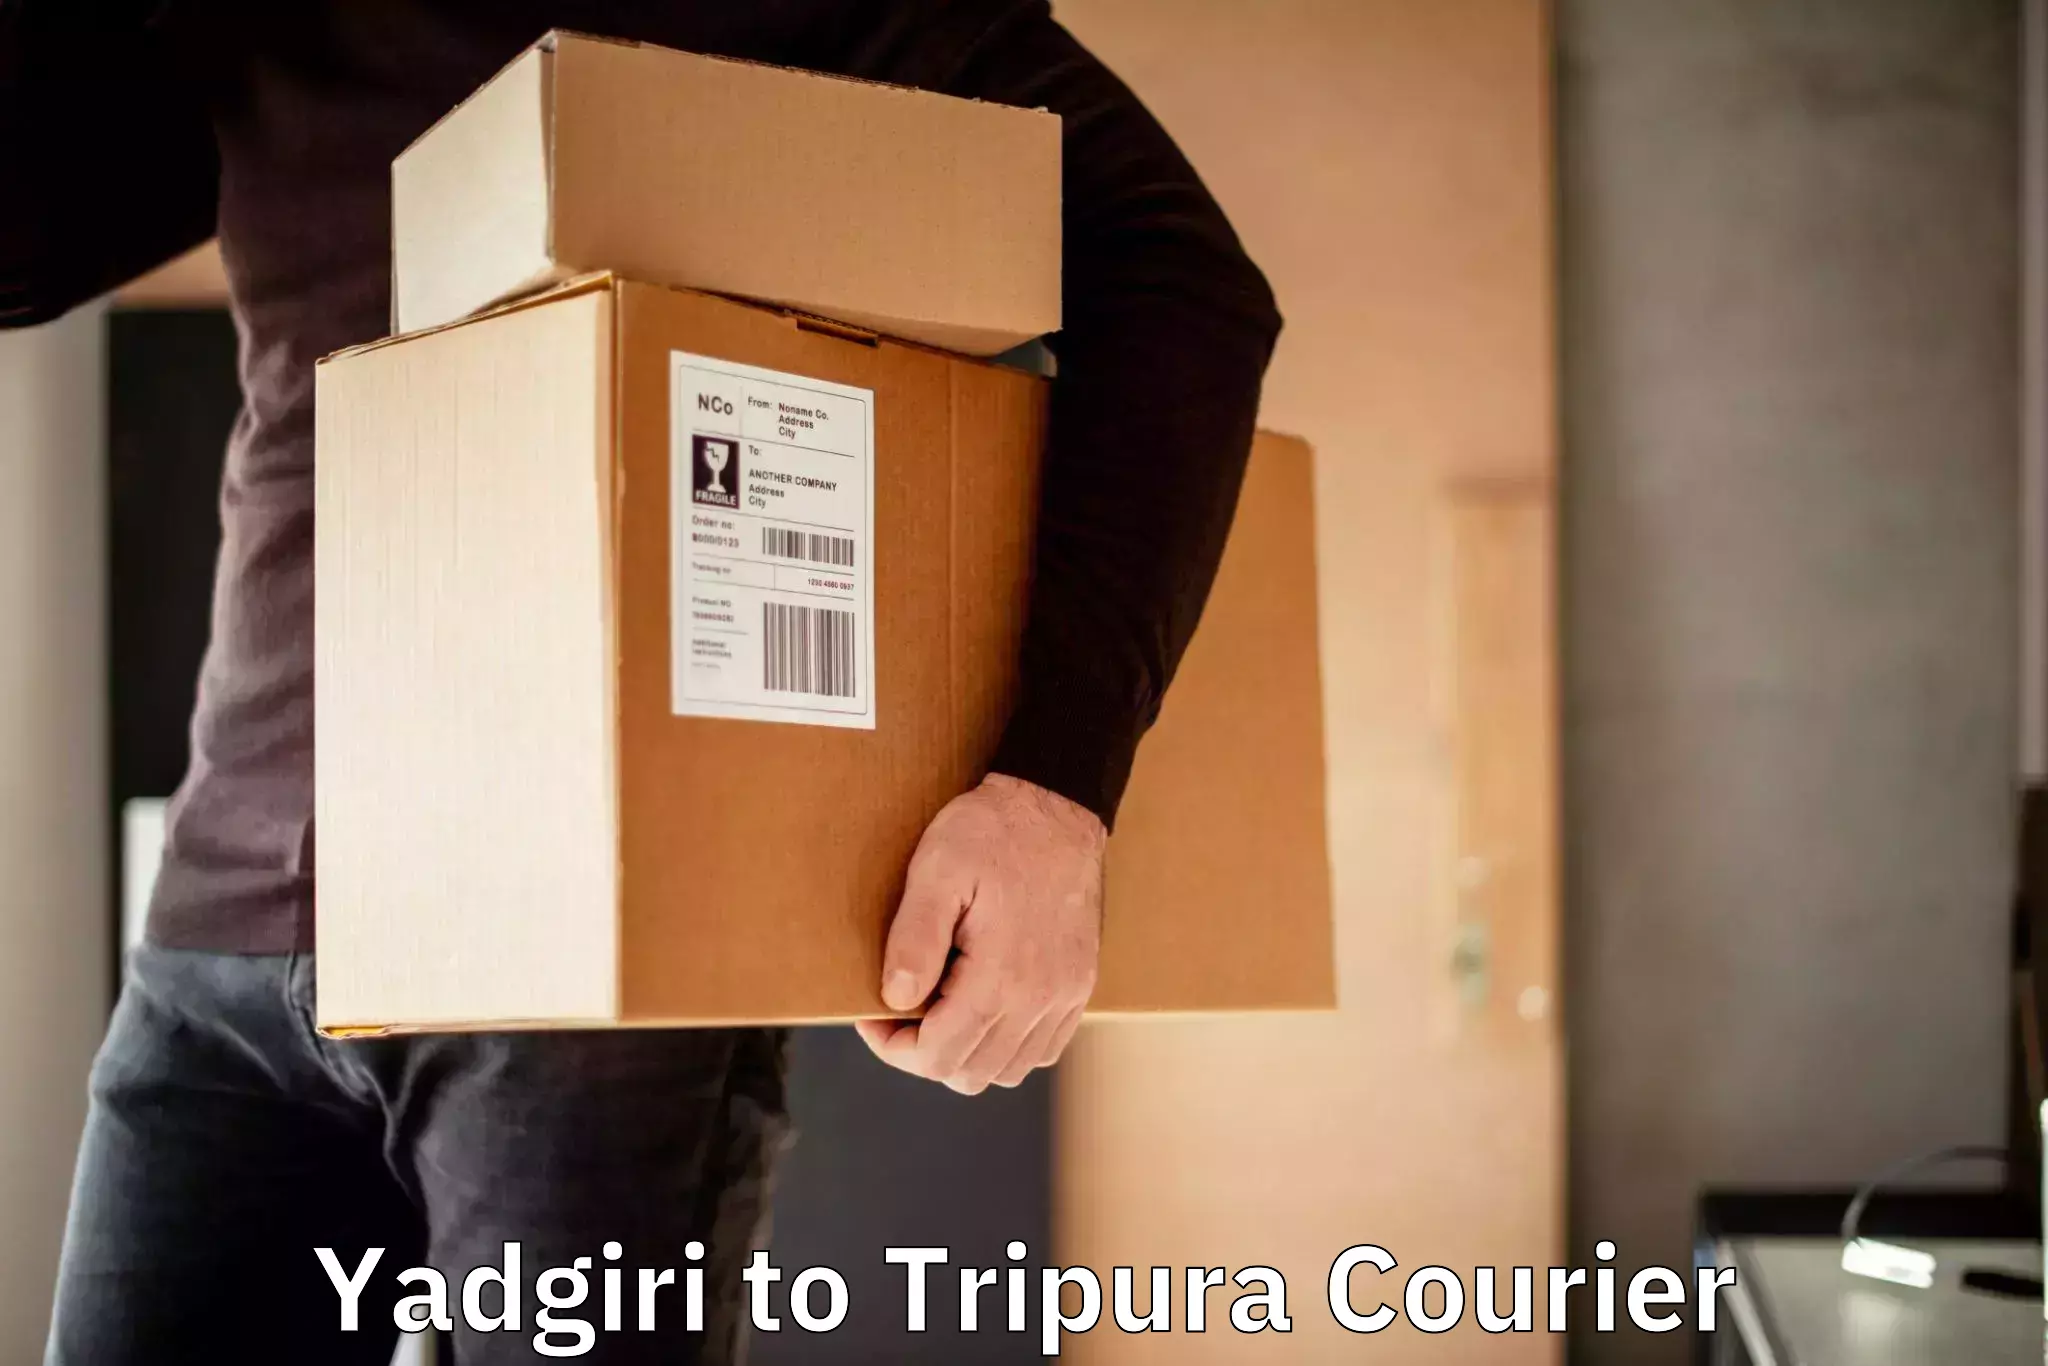 State-of-the-art courier technology Yadgiri to Udaipur Tripura